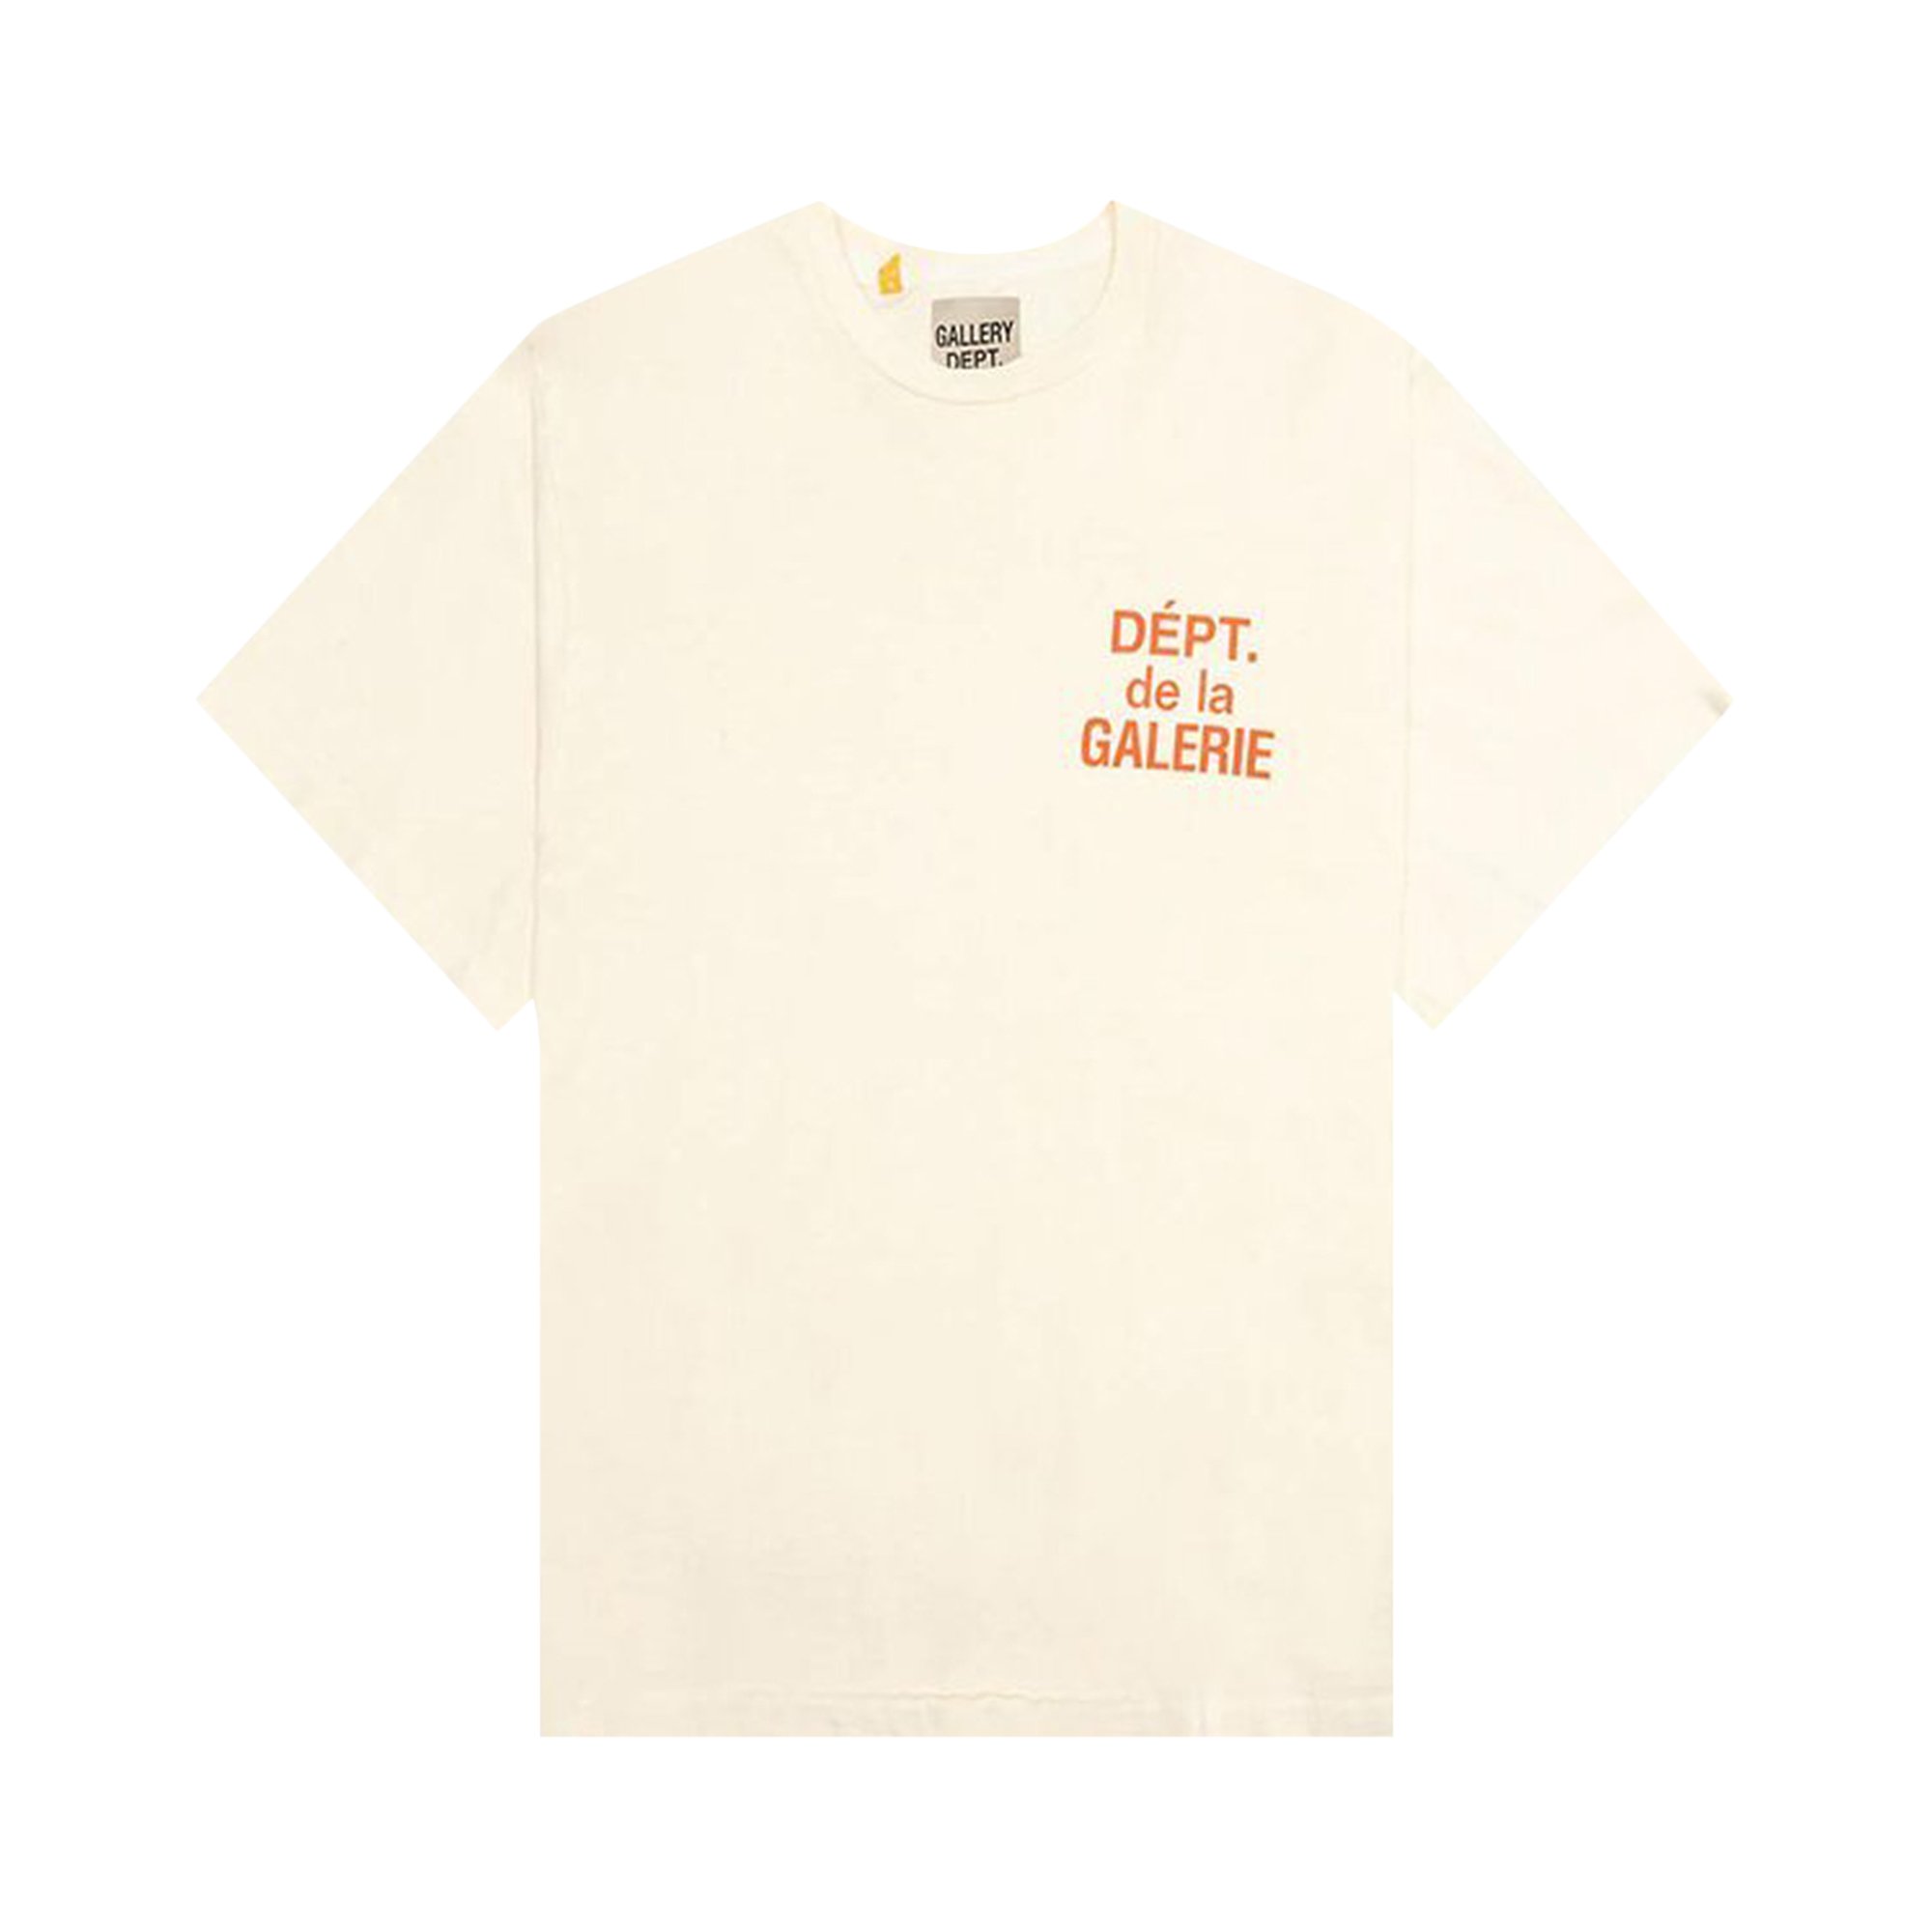 Gallery Dept. French Tee 'Creme'